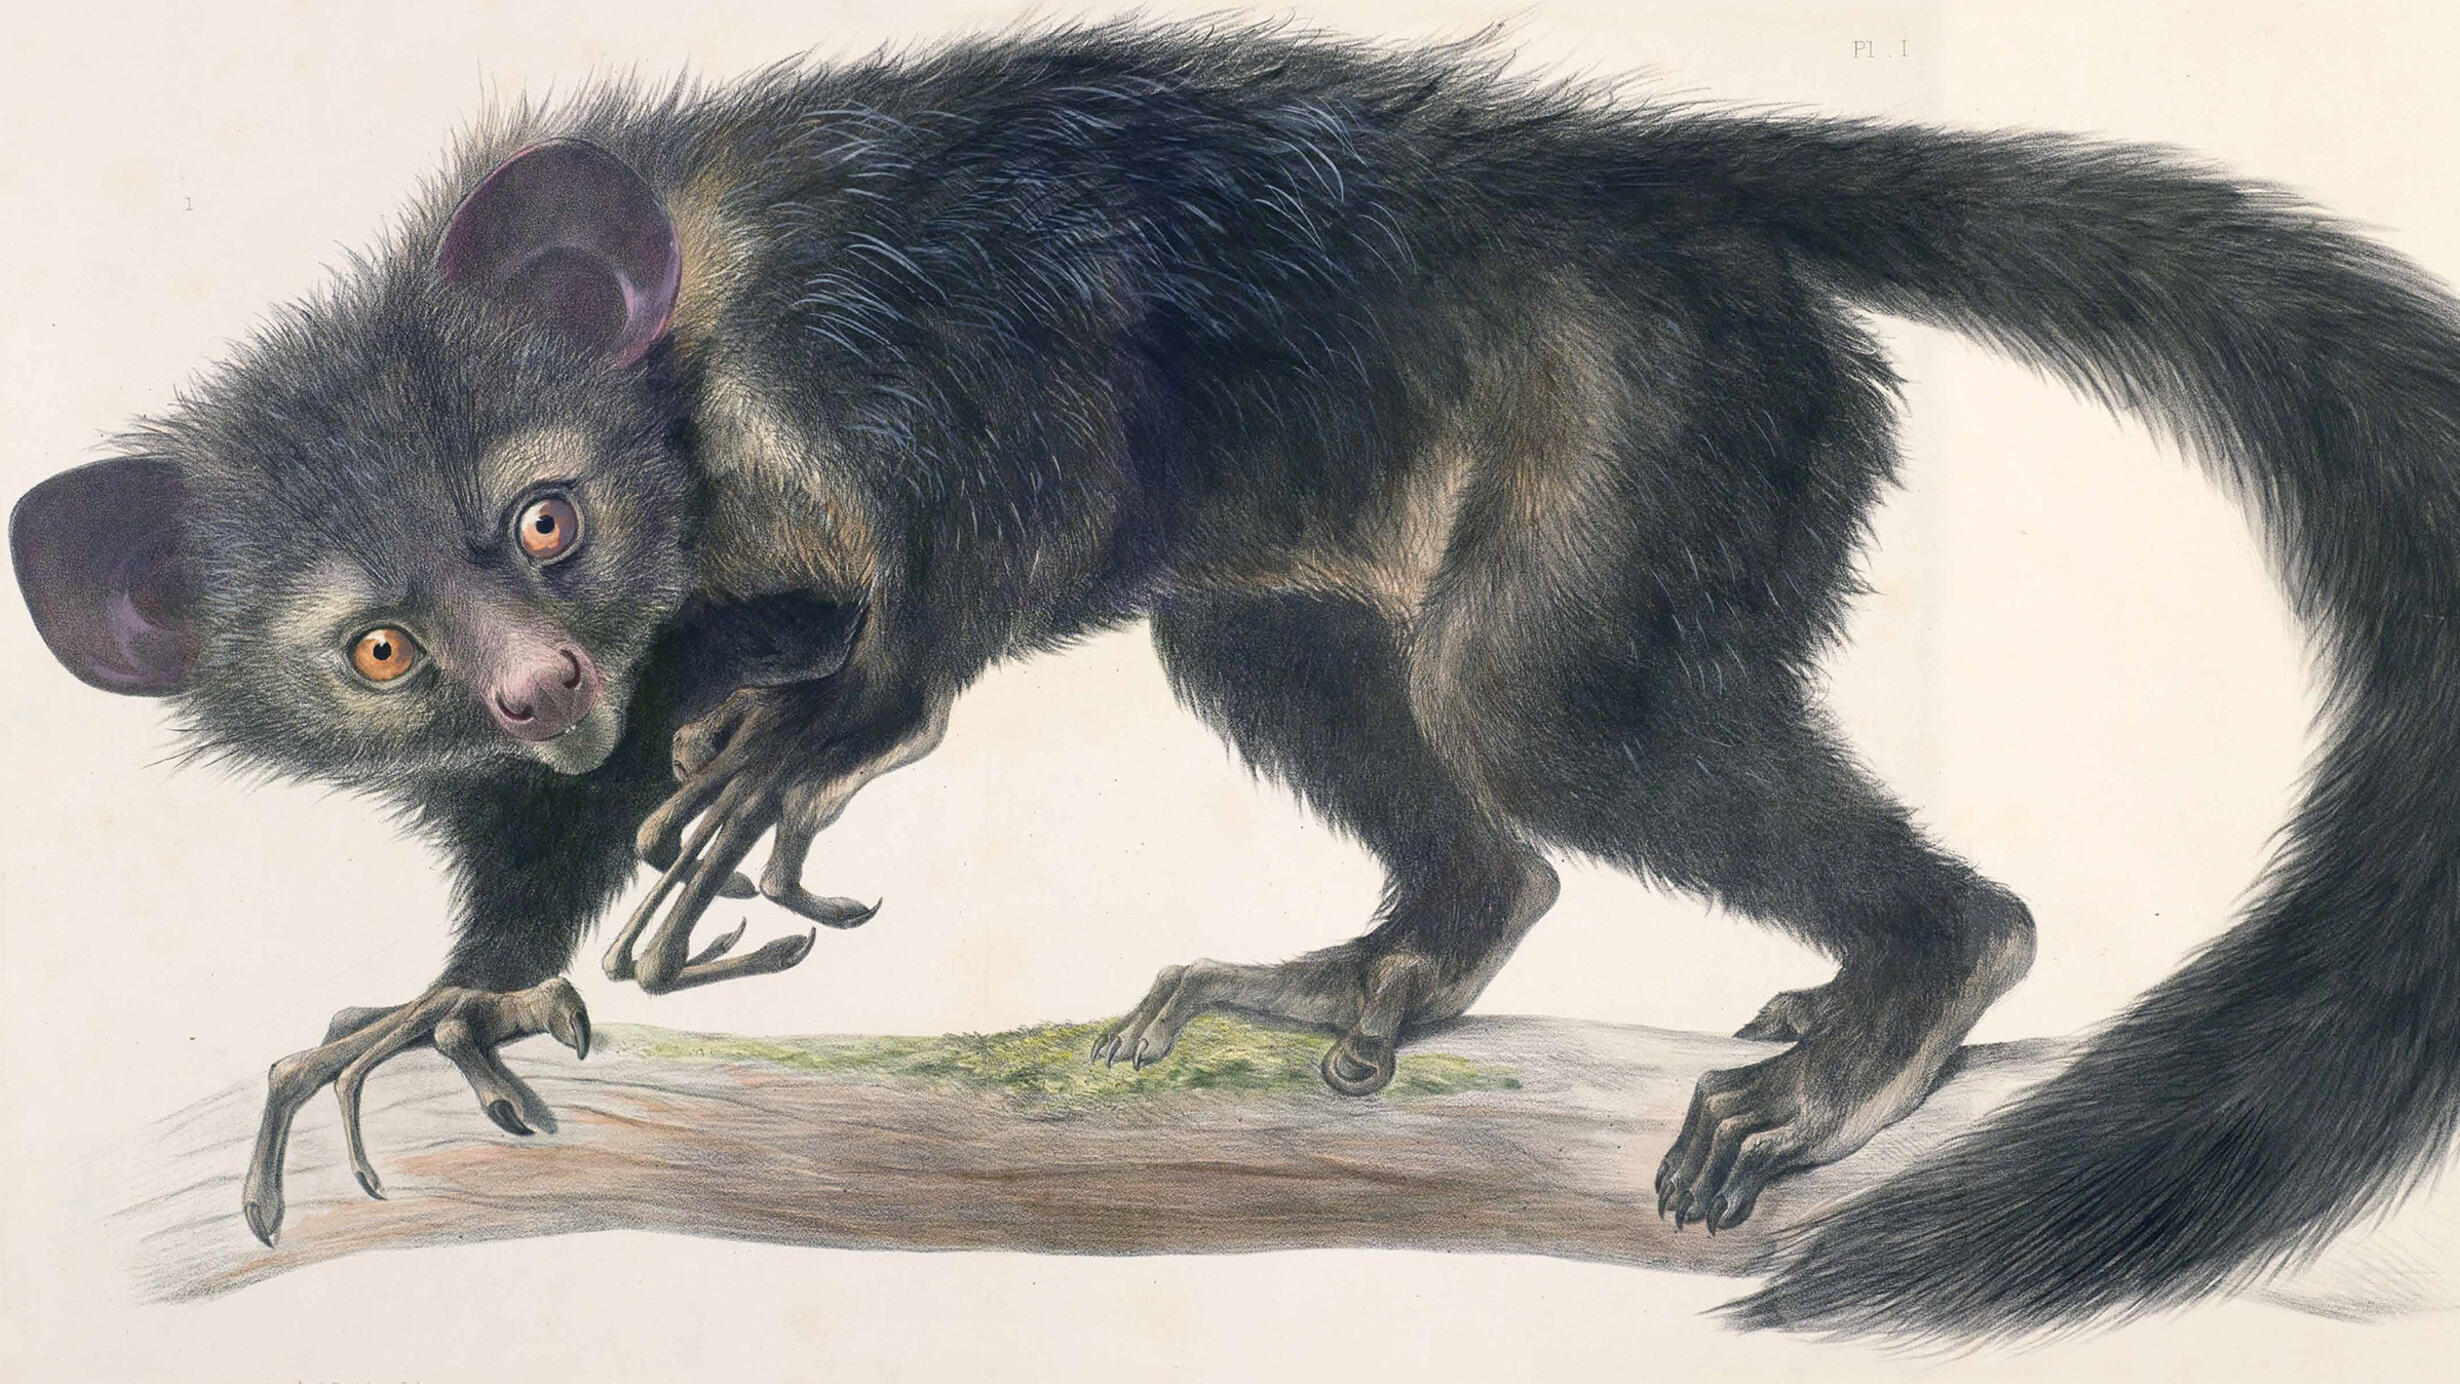 Illustration of an aye-aye lemur crawling across a branch and looking startled